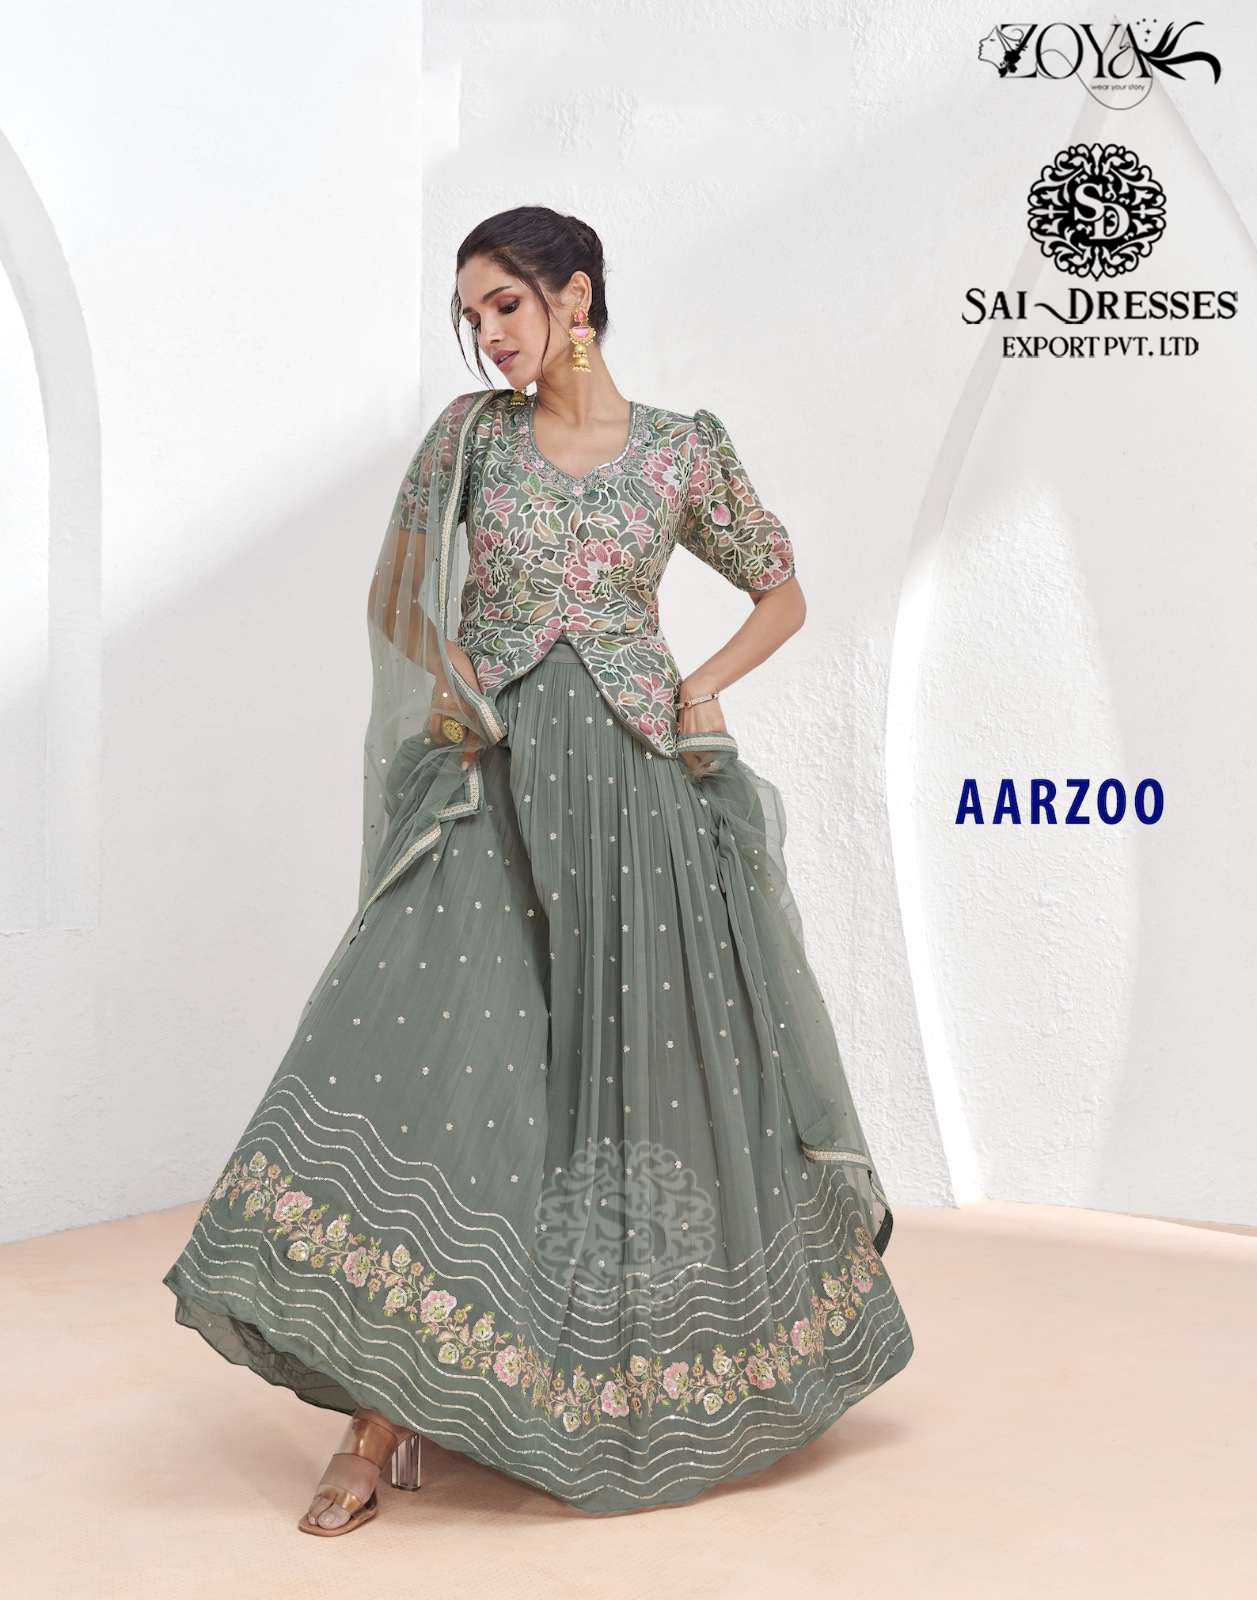  AARZOO READY TO FESTIVE WEAR DESIGNER 3 PIECE SUITS IN WHOLESALE RATE IN SURAT